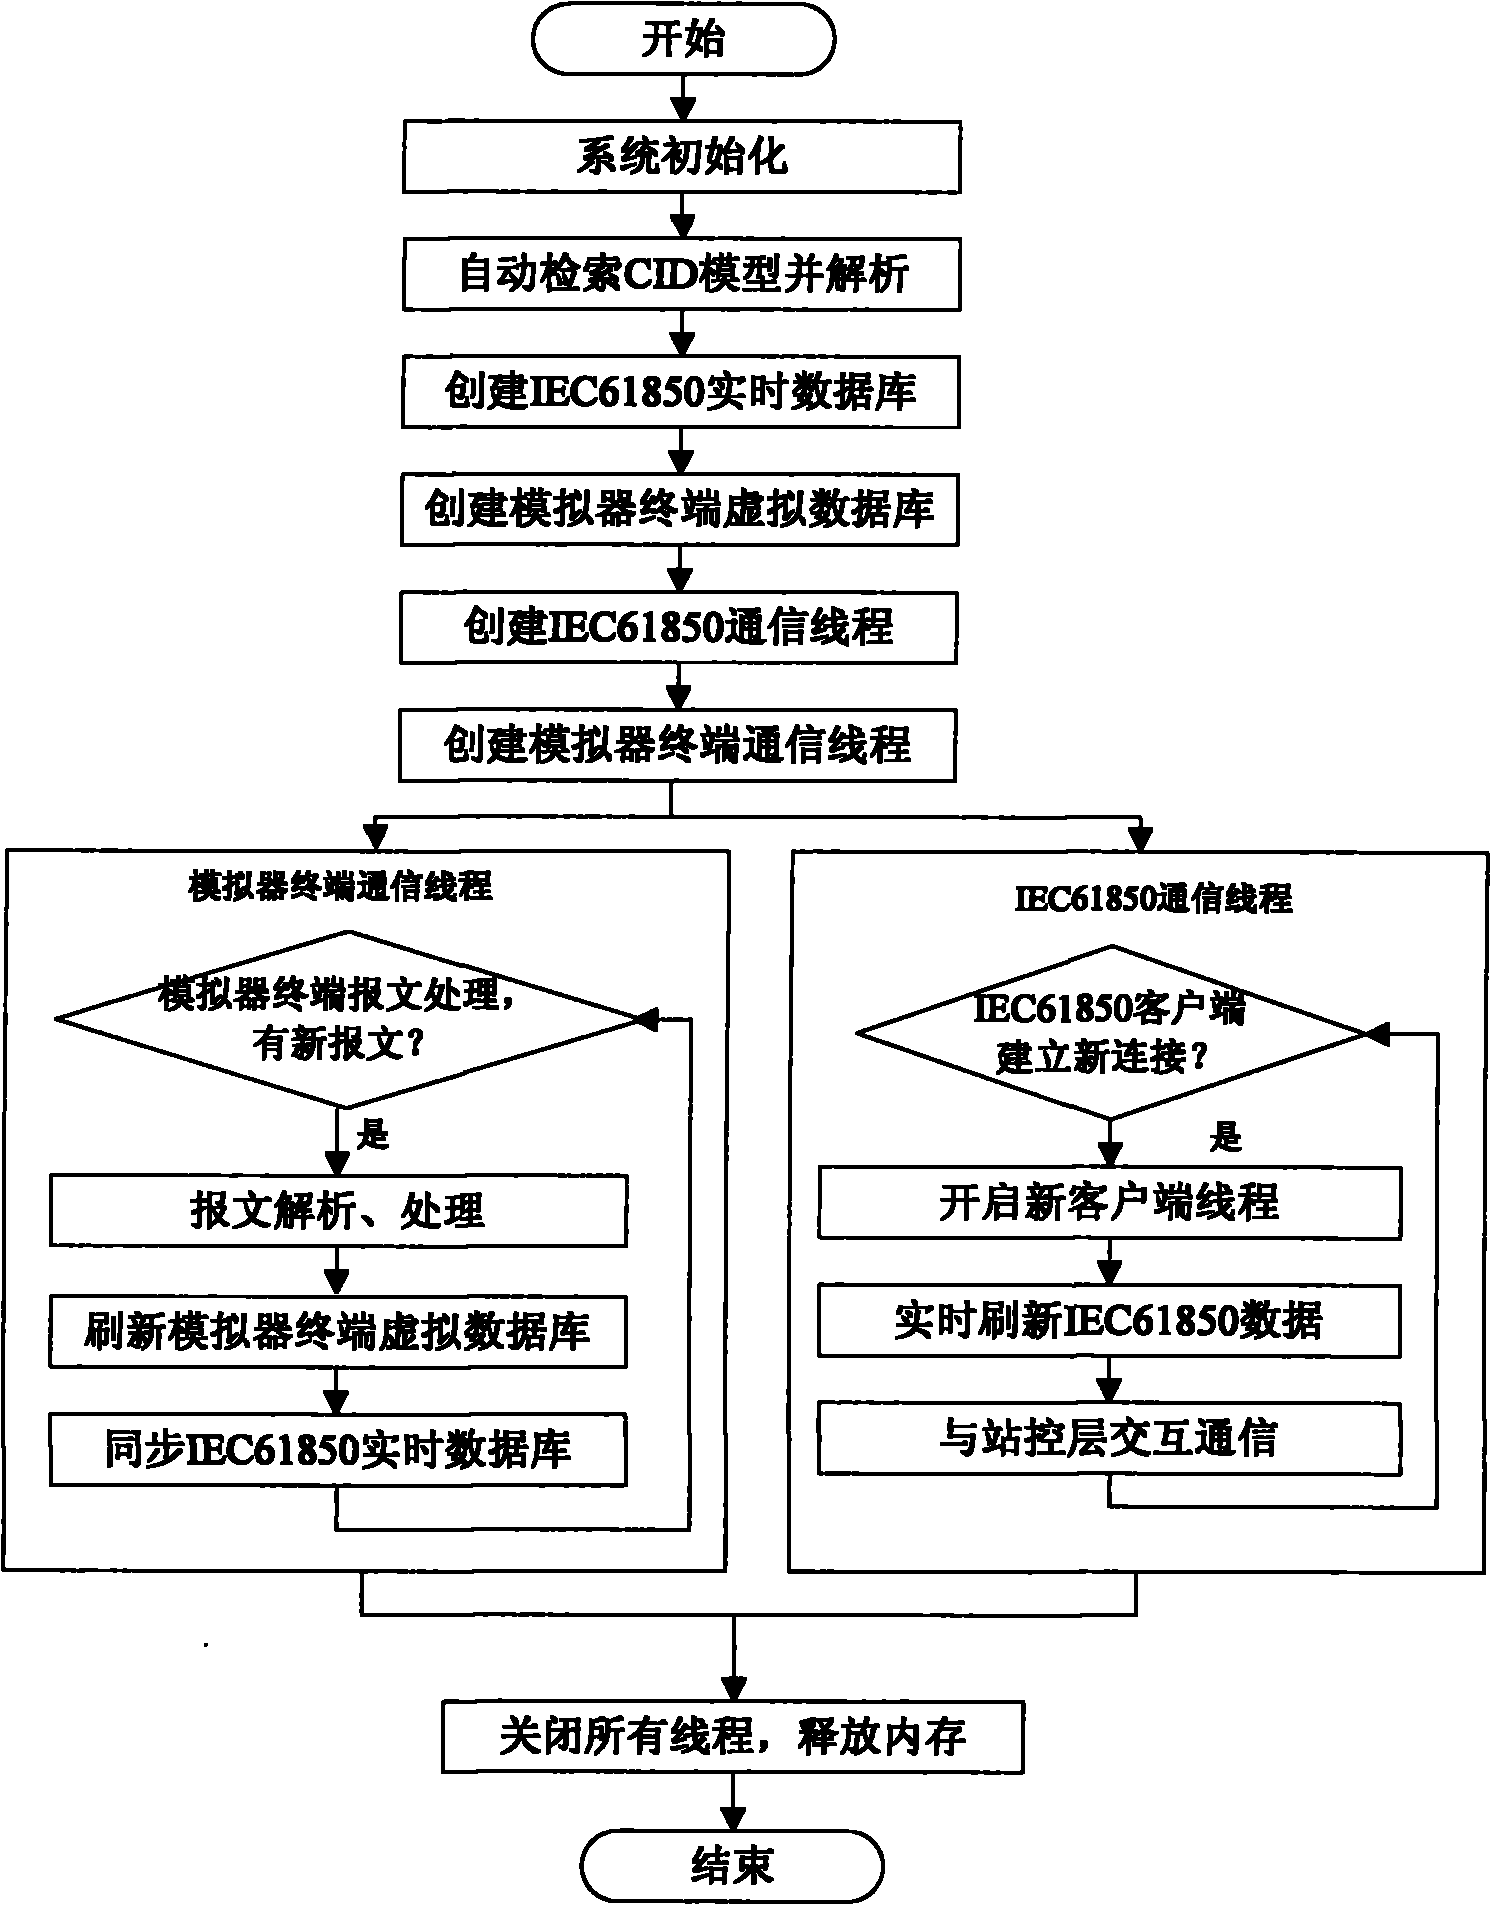 Server-side simulating system based on IEC61850 and method thereof